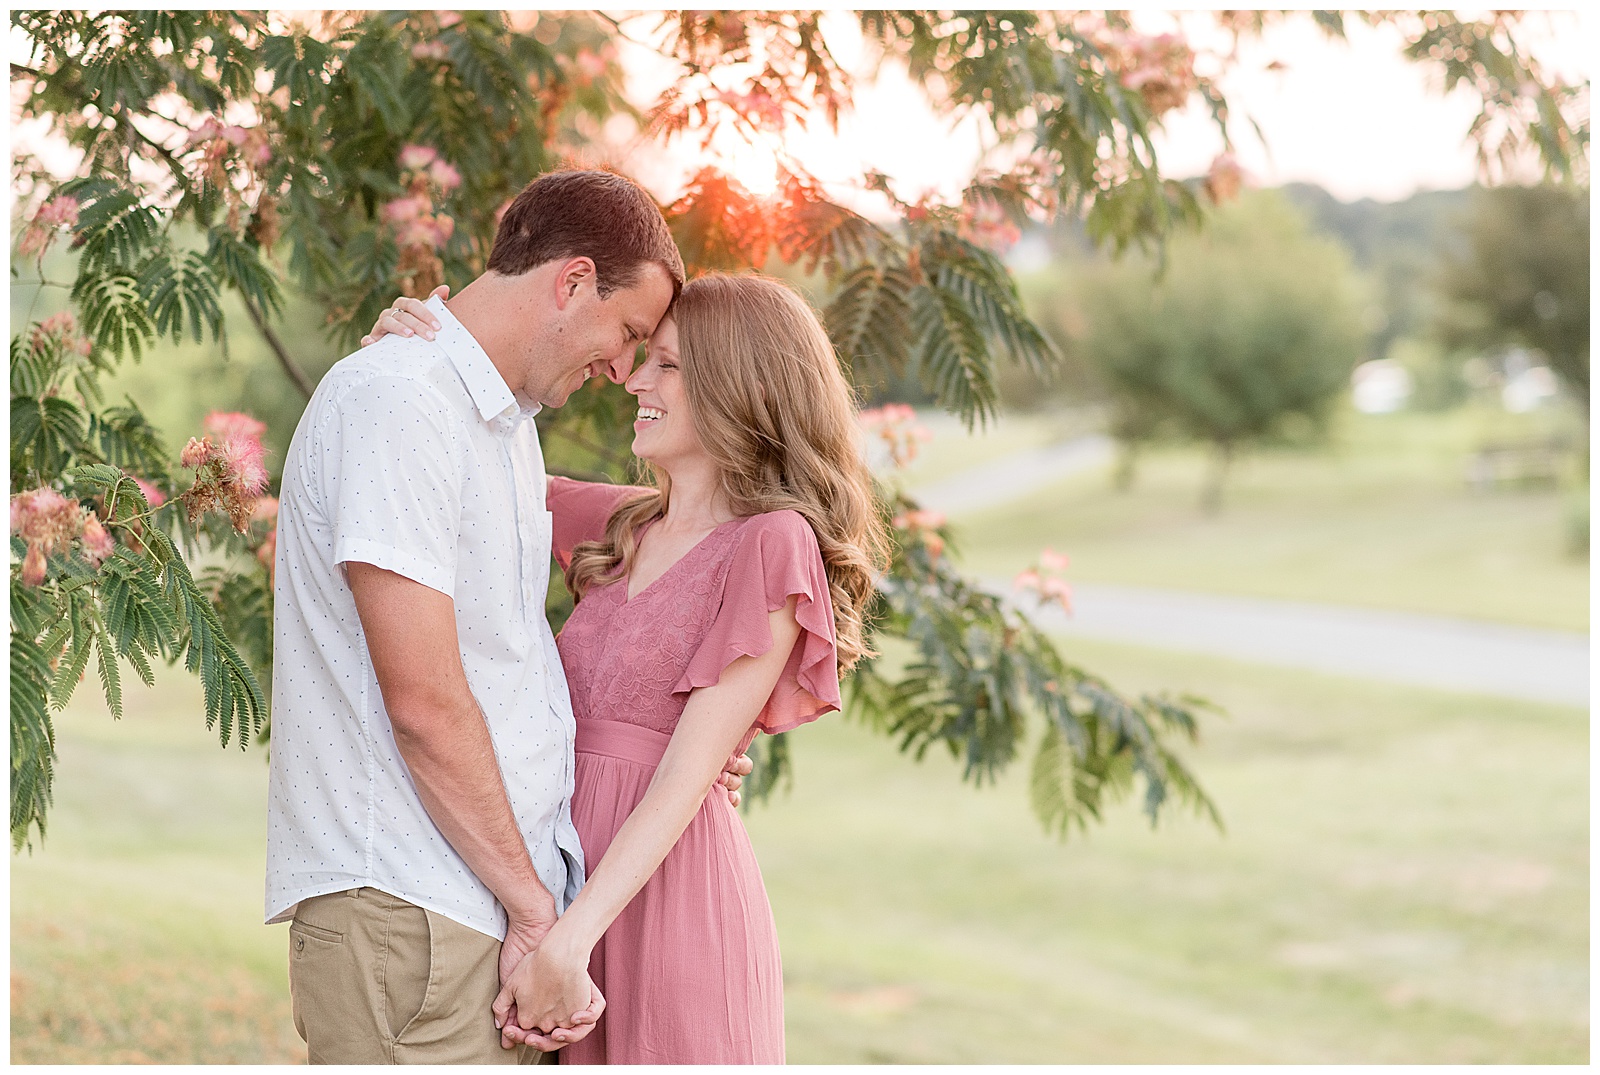 engaged couple standing under tree resting their foreheads together and smiling as they hold hands at sunset